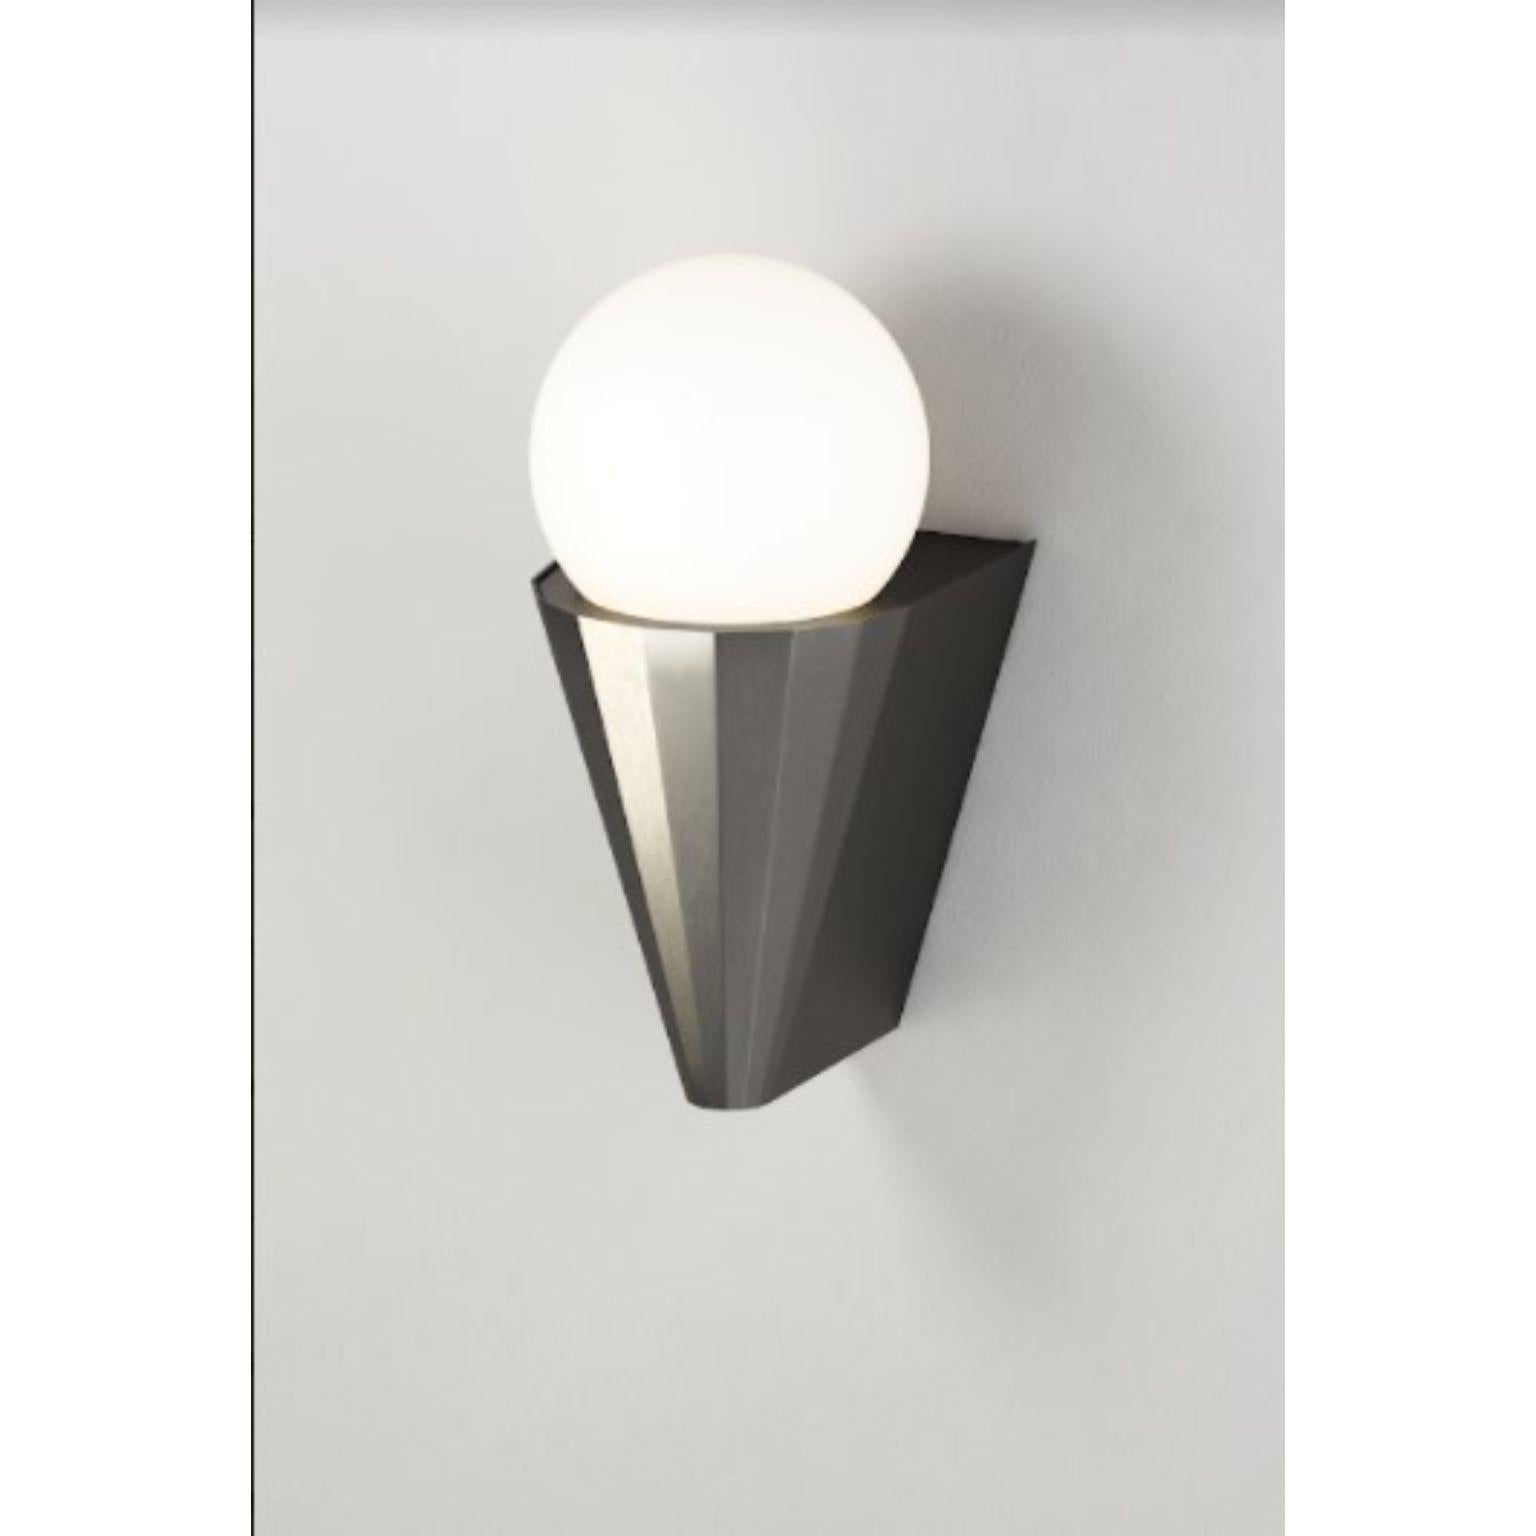 IP cornet satin graphite wall light by Emilie Cathelineau
Dimensions: D10 x W12.5 X H21.2 cm
Materials: solid brass, satin graphite
Others finishes are available.

All our lamps can be wired according to each country. If sold to the USA it will